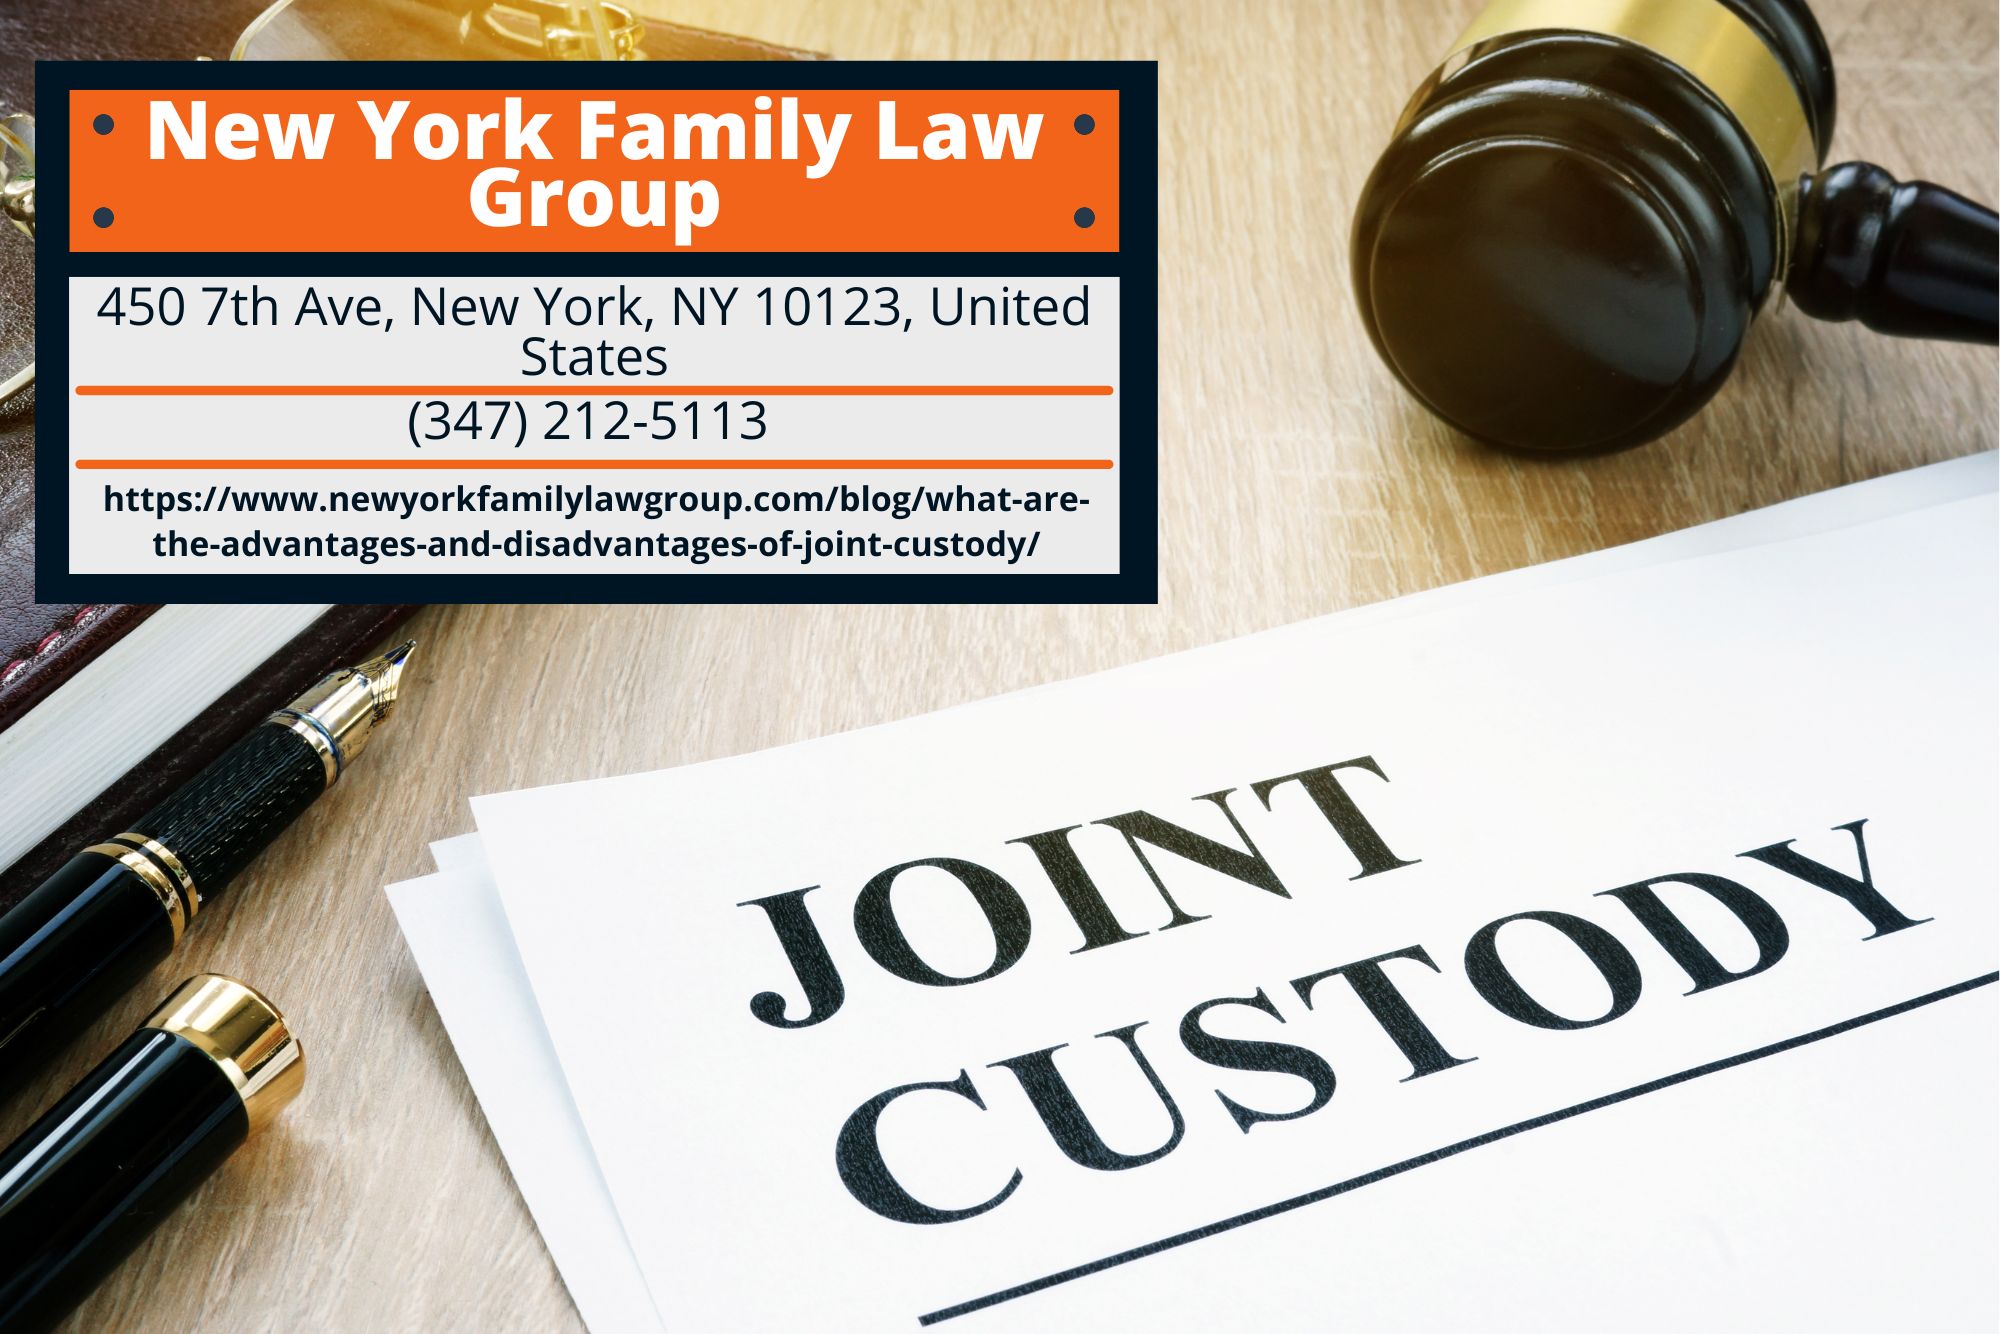 Manhattan Child Custody Attorney Martin Mohr Releases Article on Joint Custody Advantages and Disadvantages